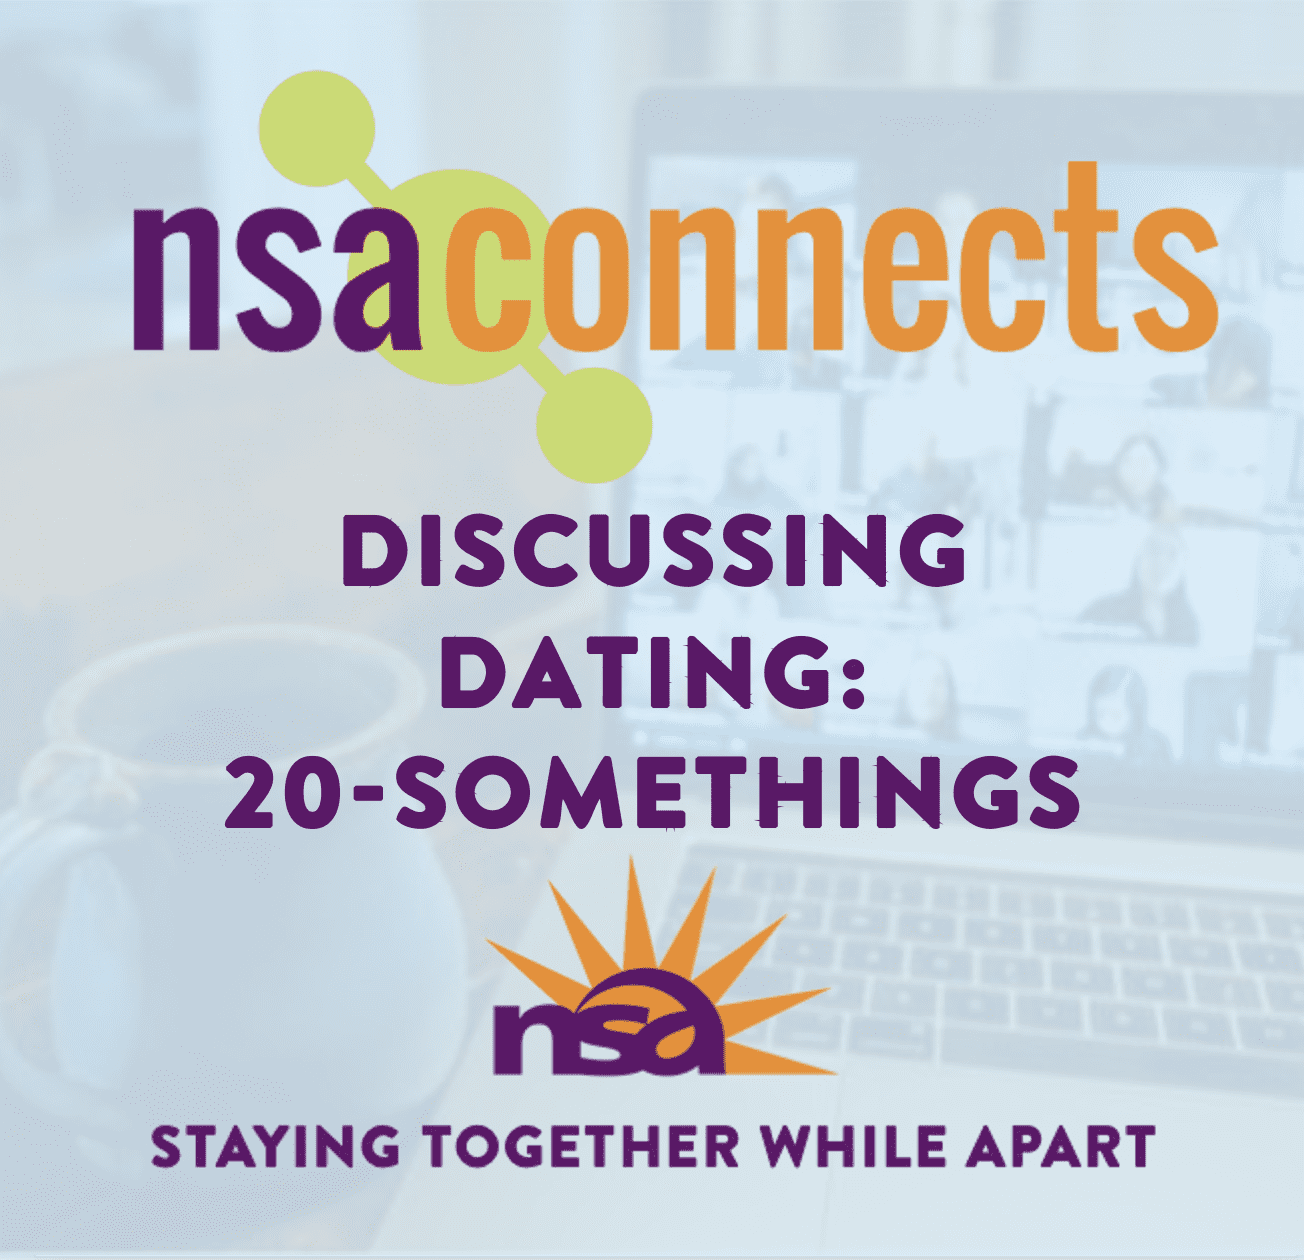 what does nsa stand for in dating